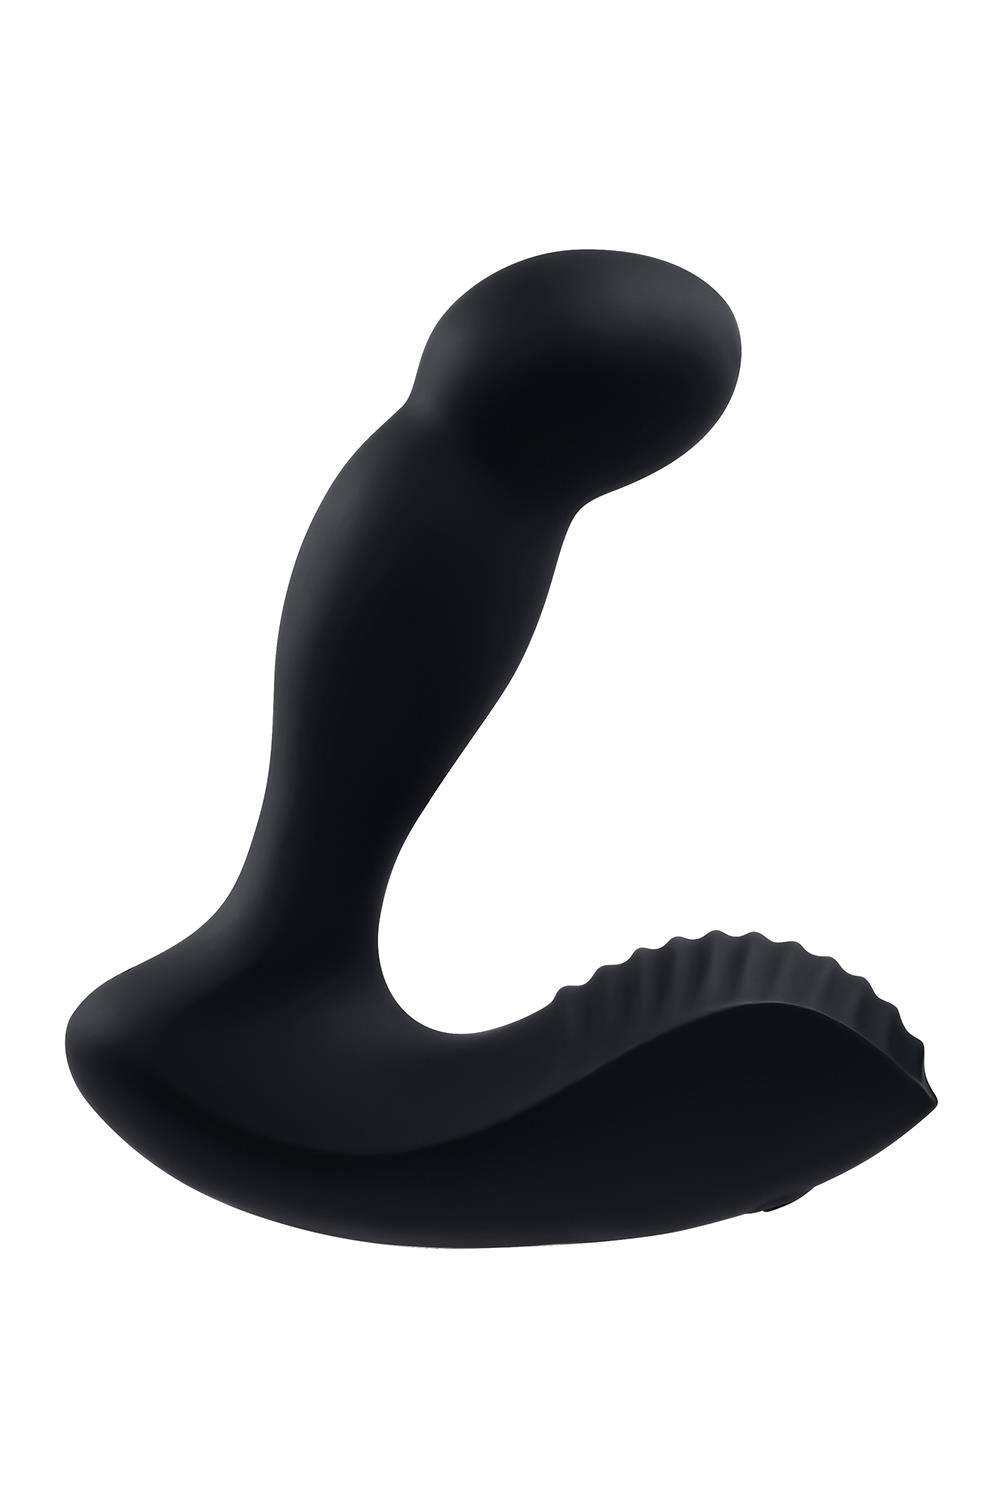 Adam Et Eve Adams Come Hither Prostate Massager